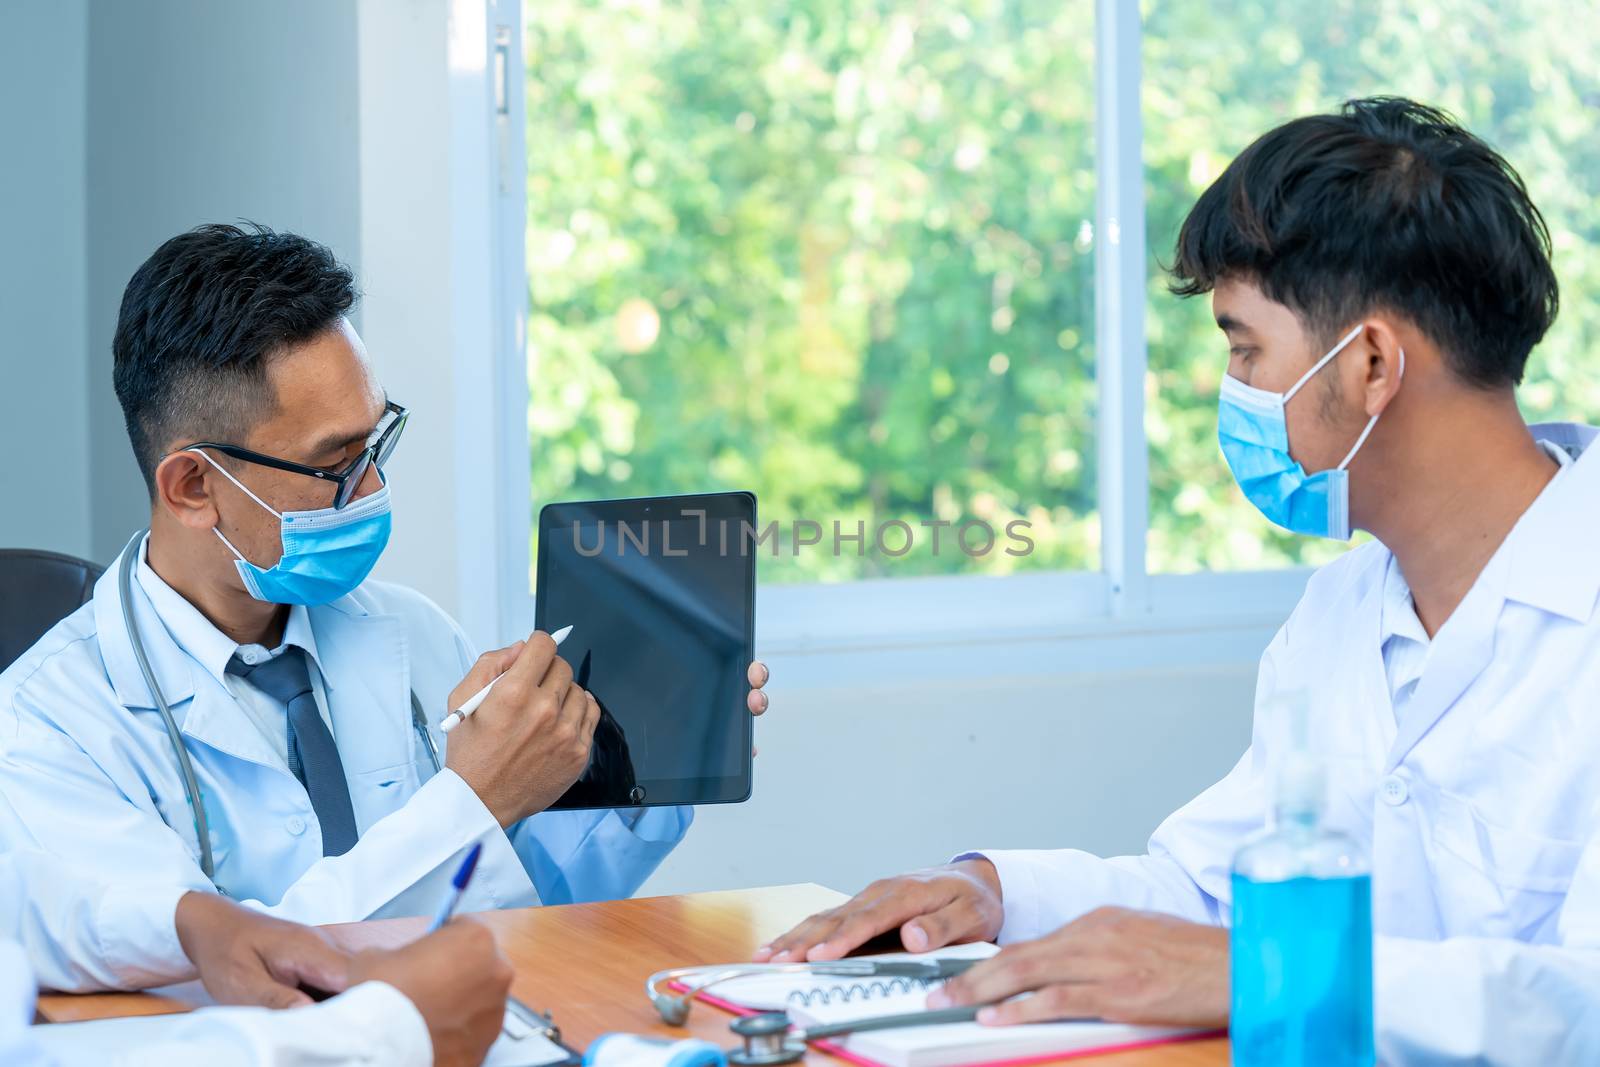 Group of doctor wearing protective surgical mask and discussing work together at the table during meeting at hospital,Epidemic virus outbreak concept.